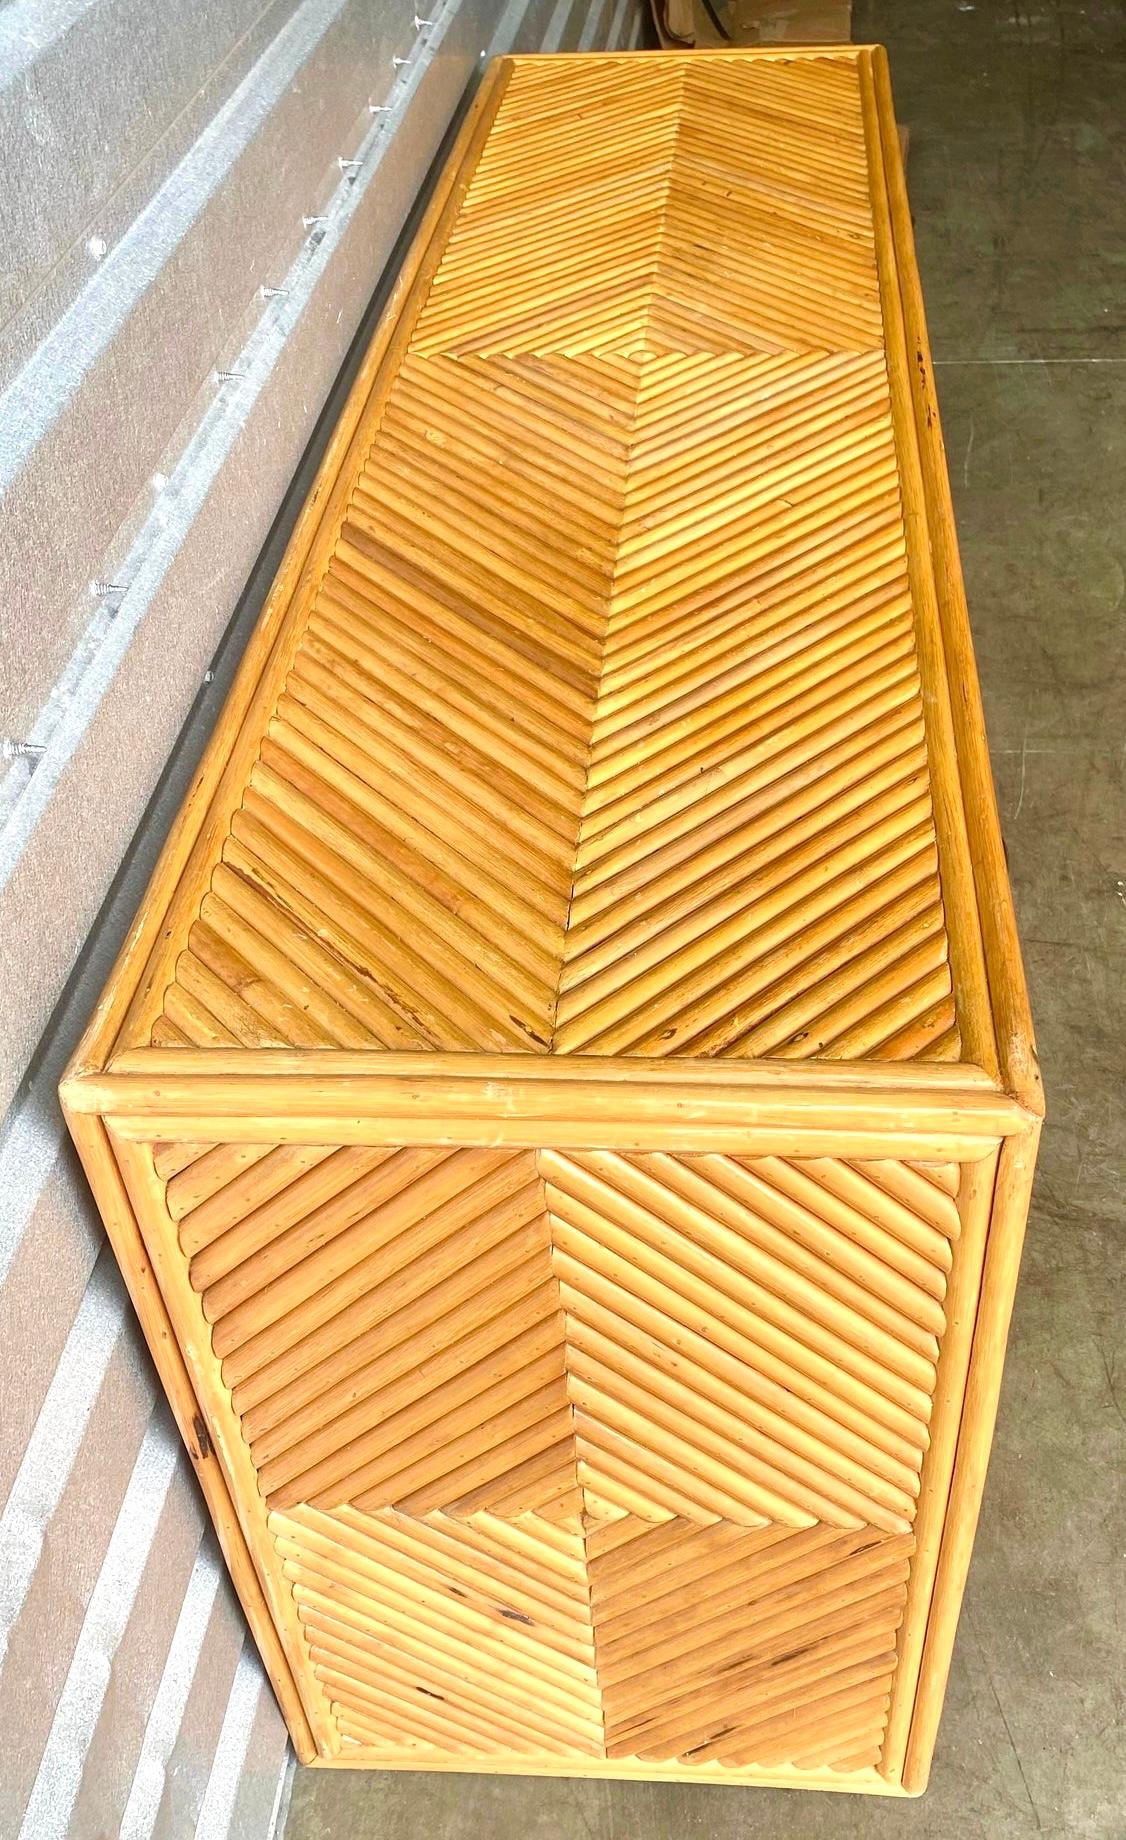 Fabulous vintage pretzel rattan dresser. A brilliant chevron design on all surfaces. Polished brass hardware. Super chic. Acquired from a Palm Beach estate.